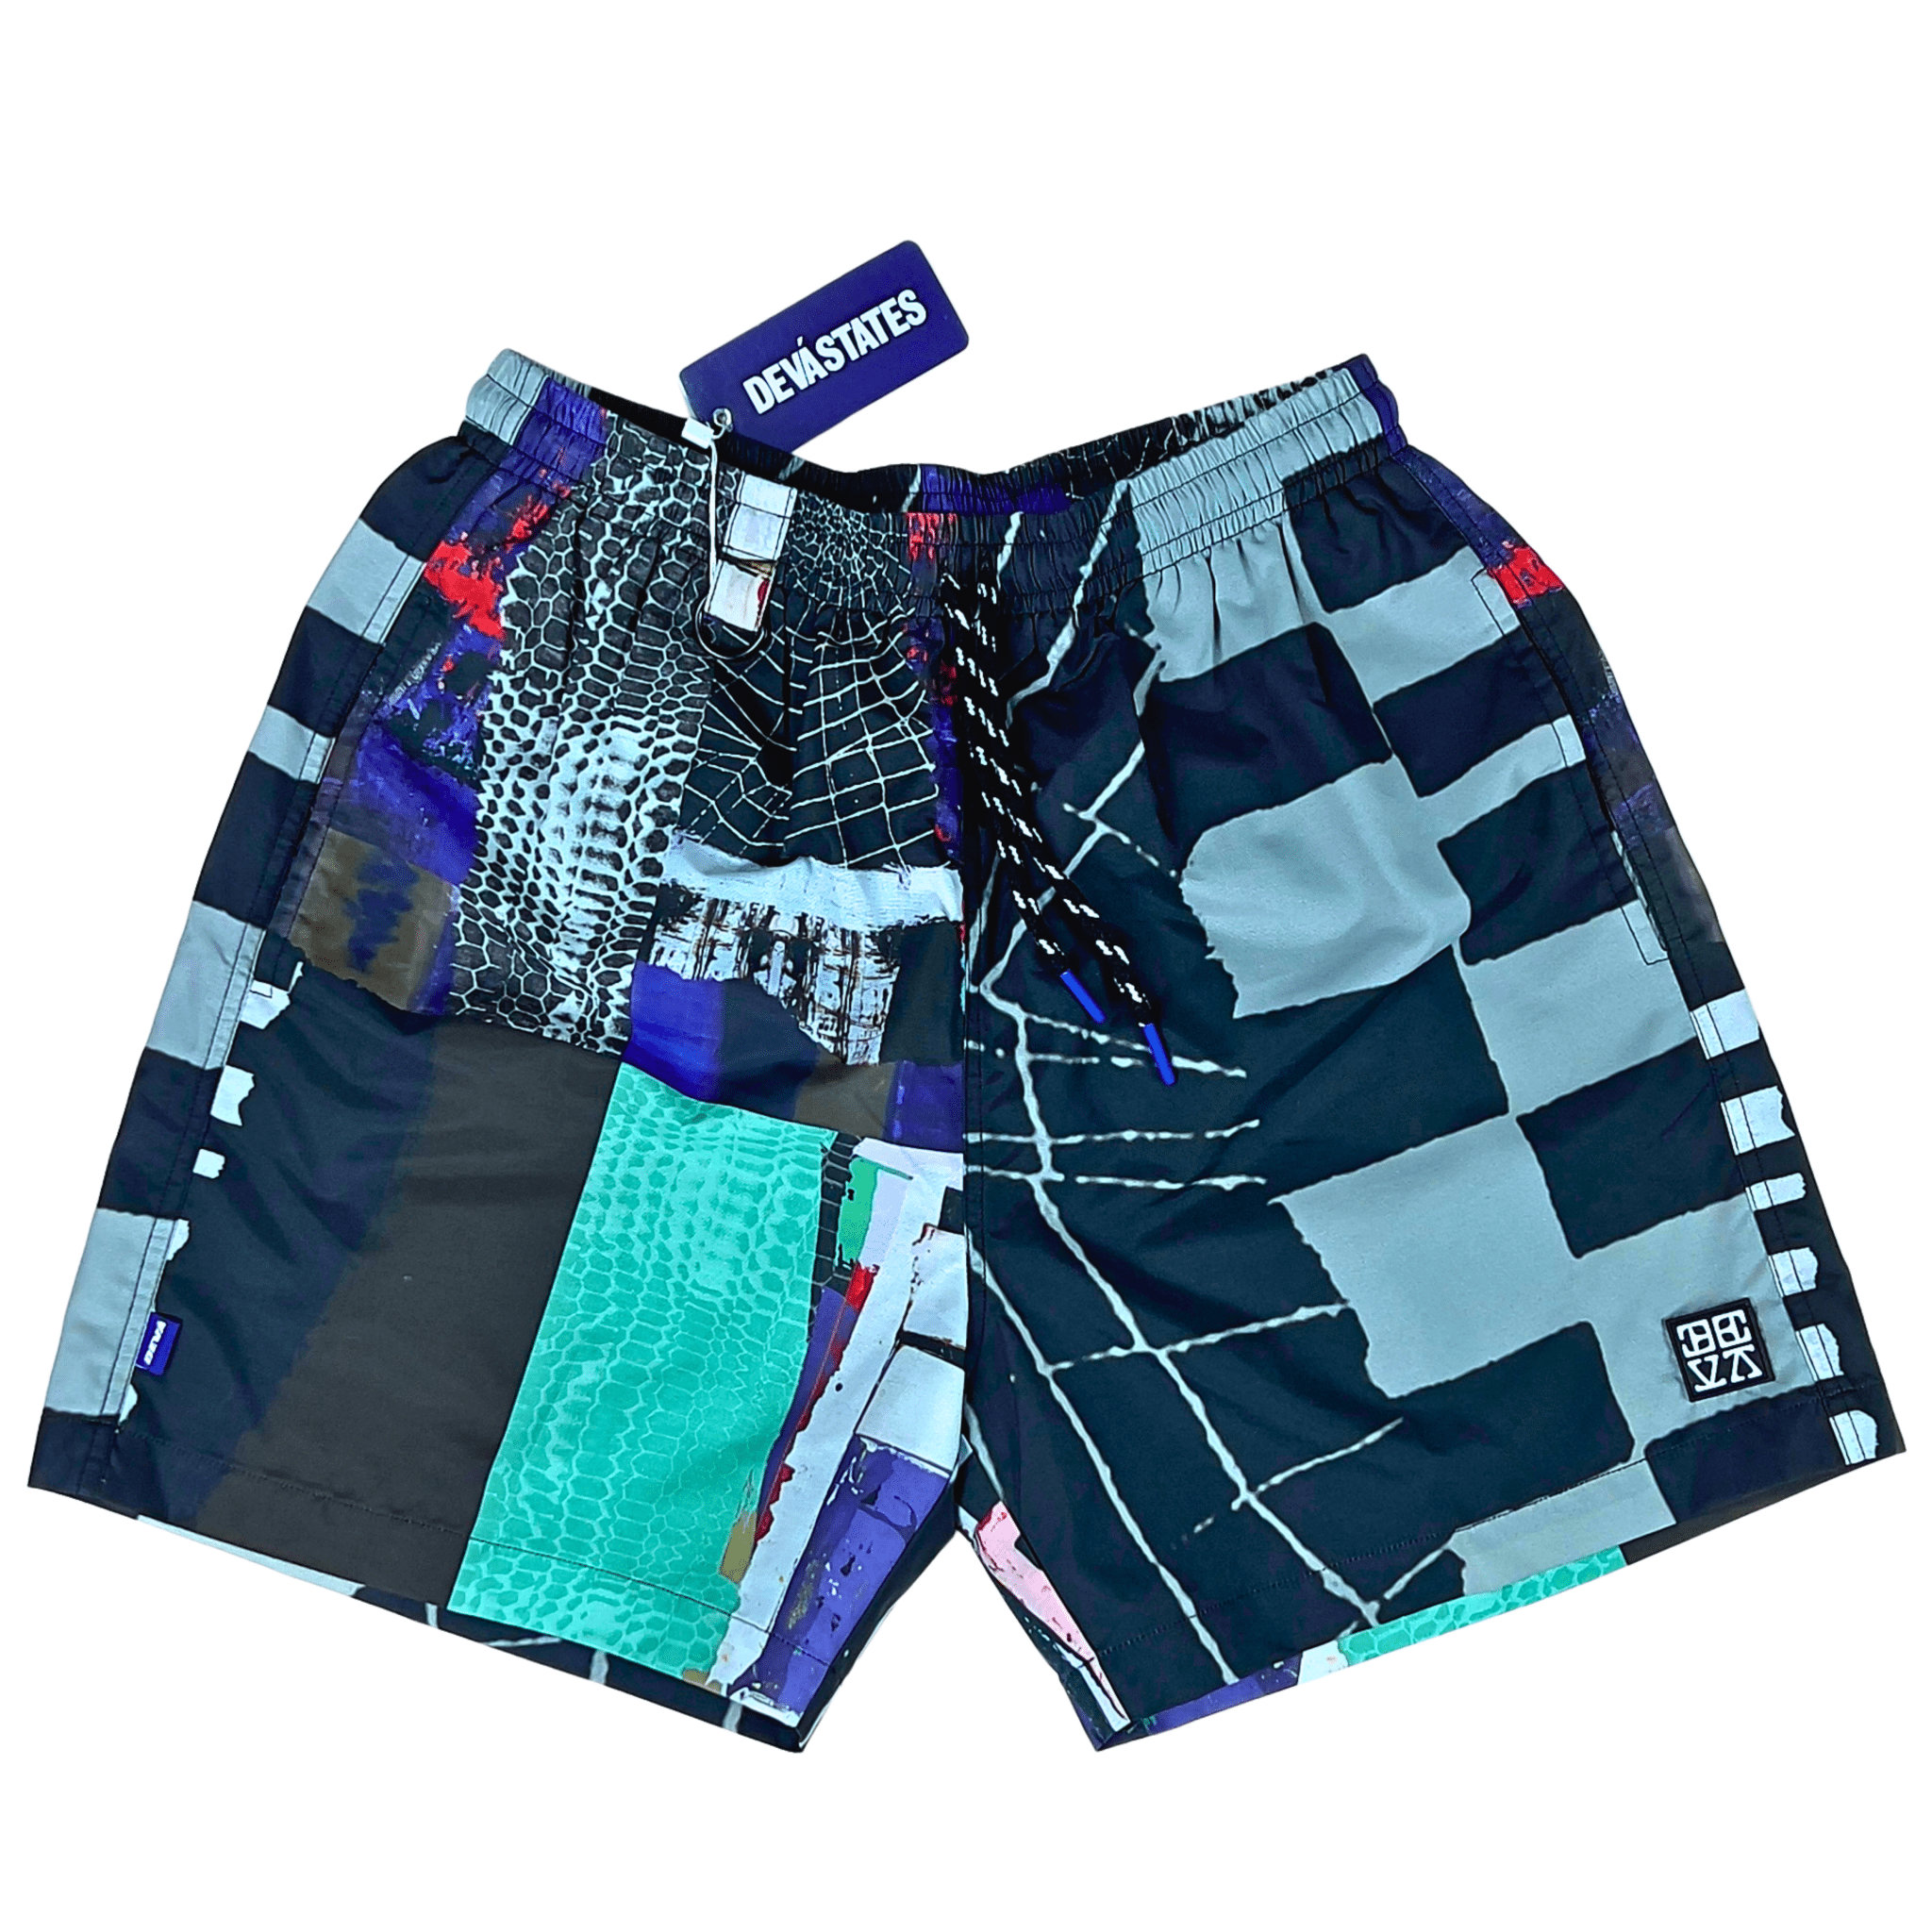 Particula Printed Nylon Shorts in multi - Devá States - State Of Flux